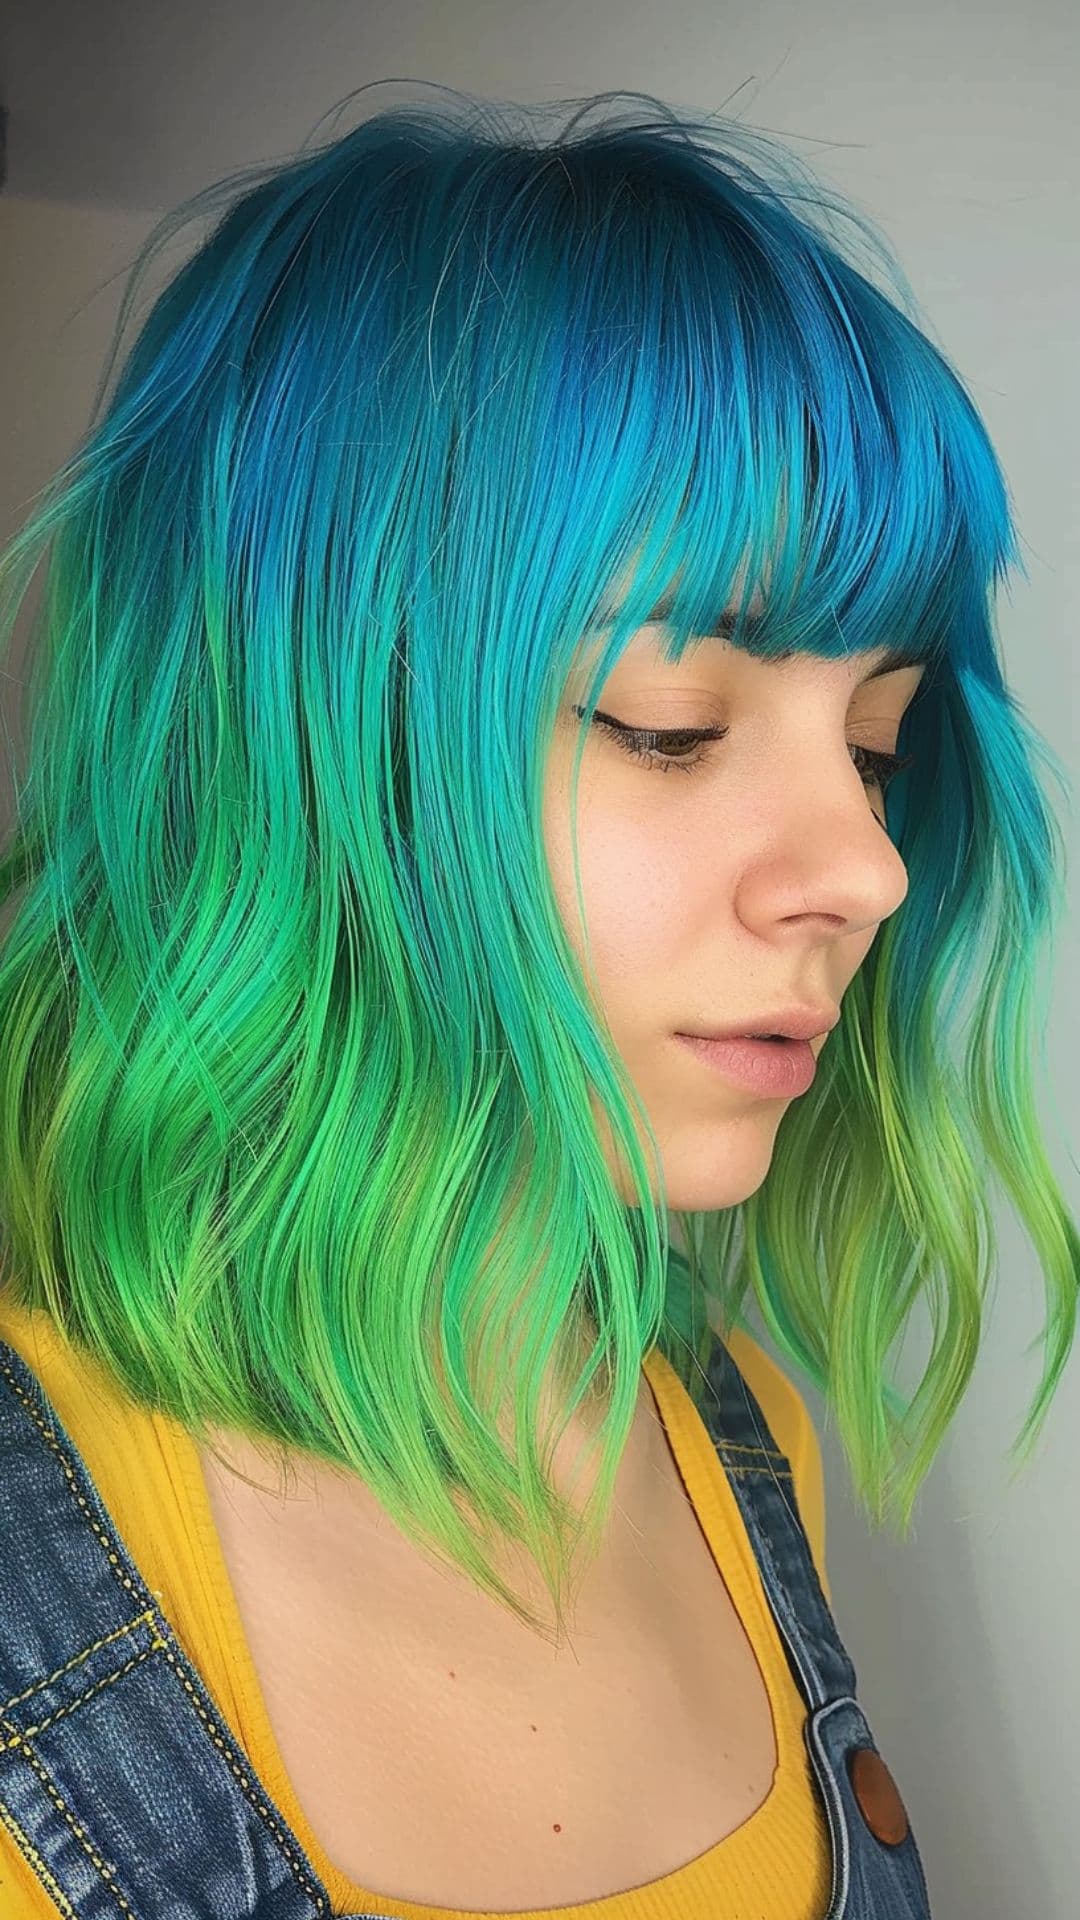 A woman modelling a blue and green hair.